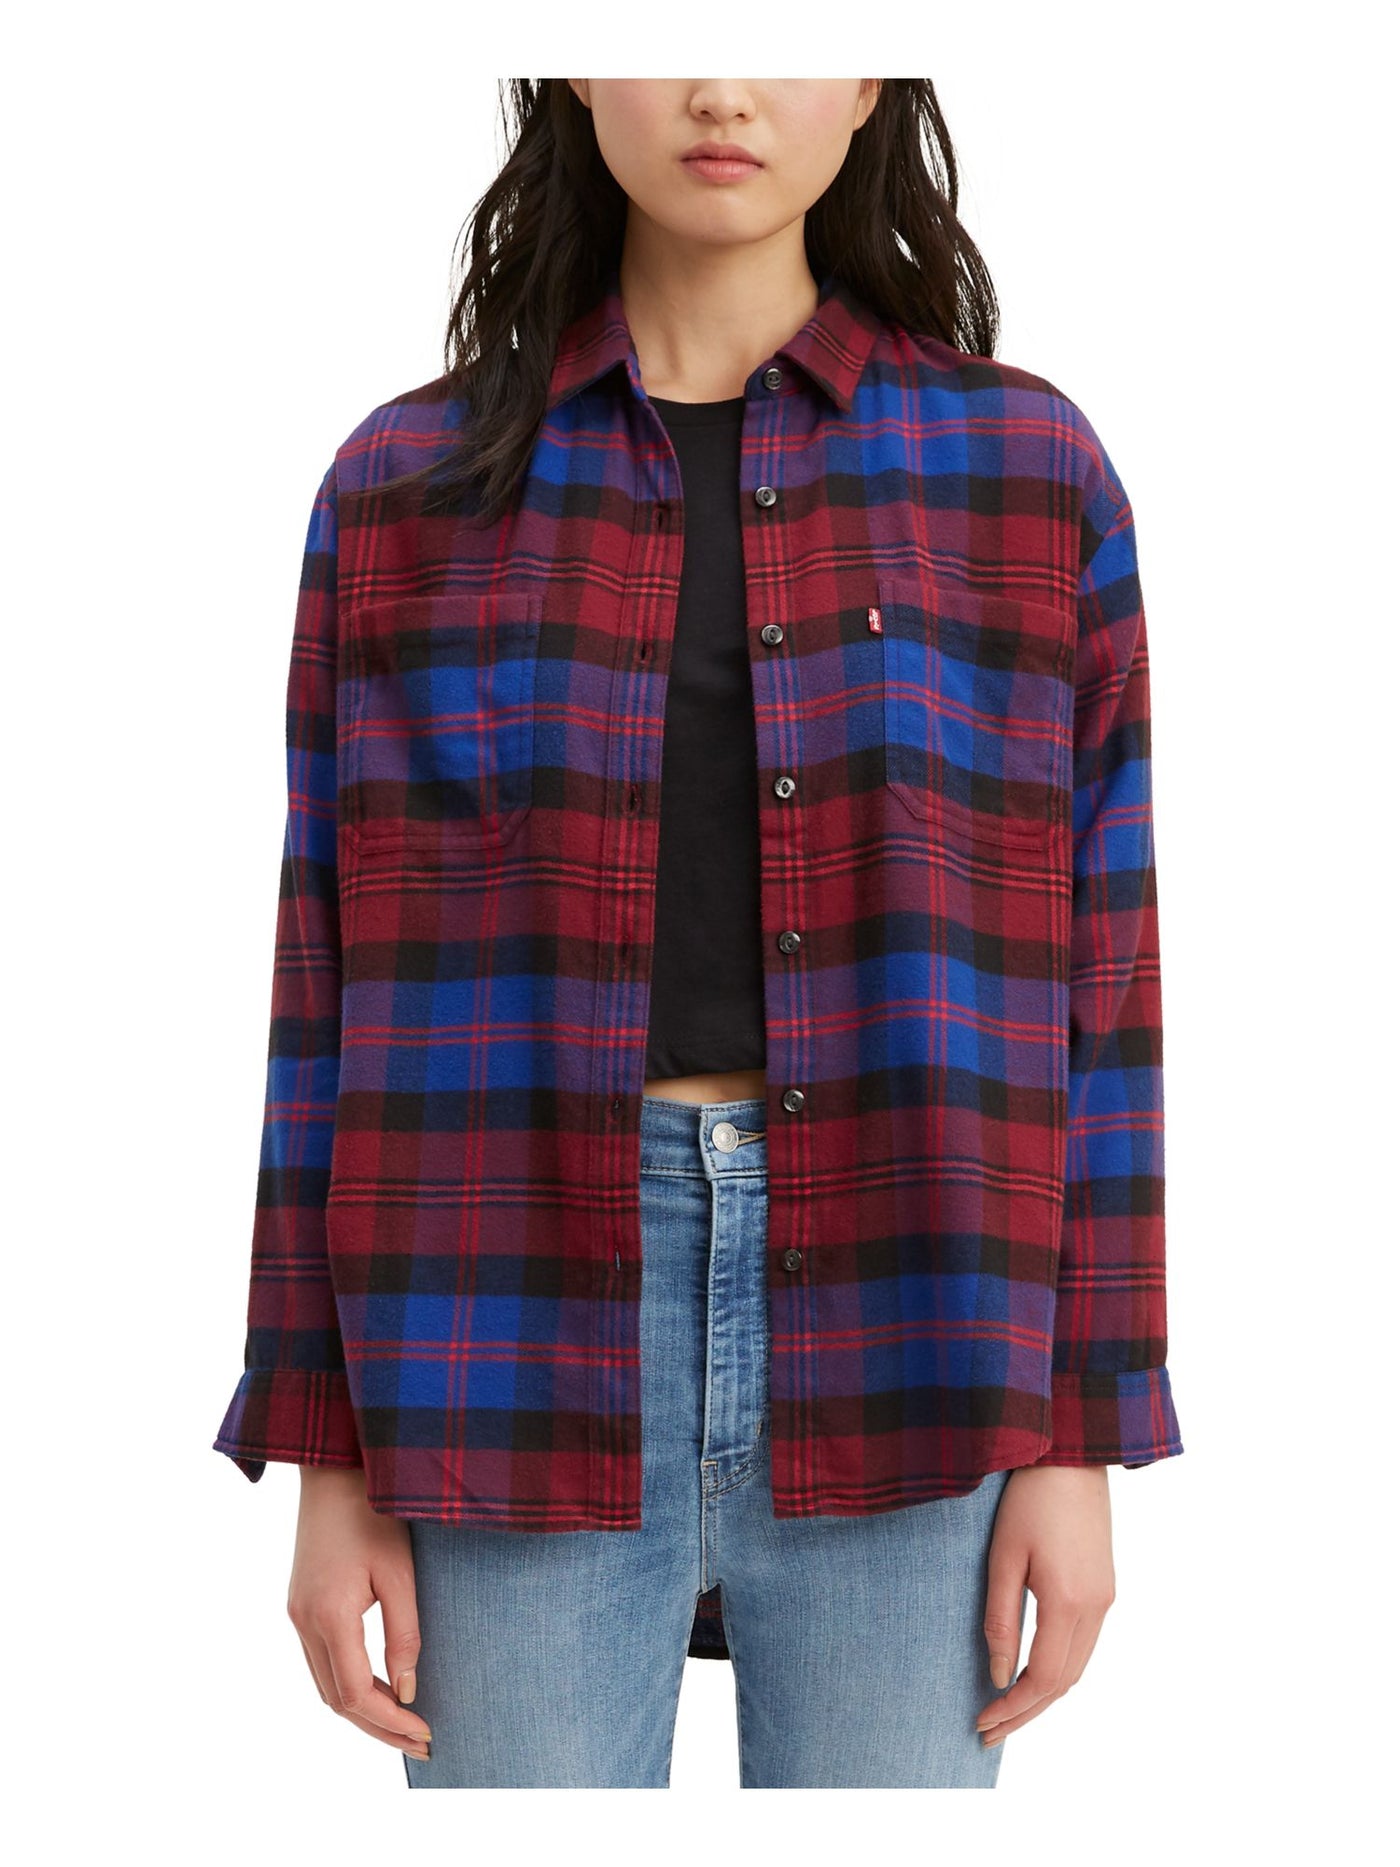 LEVI'S Womens Red Plaid Cuffed Sleeve Collared Button Up Top XL